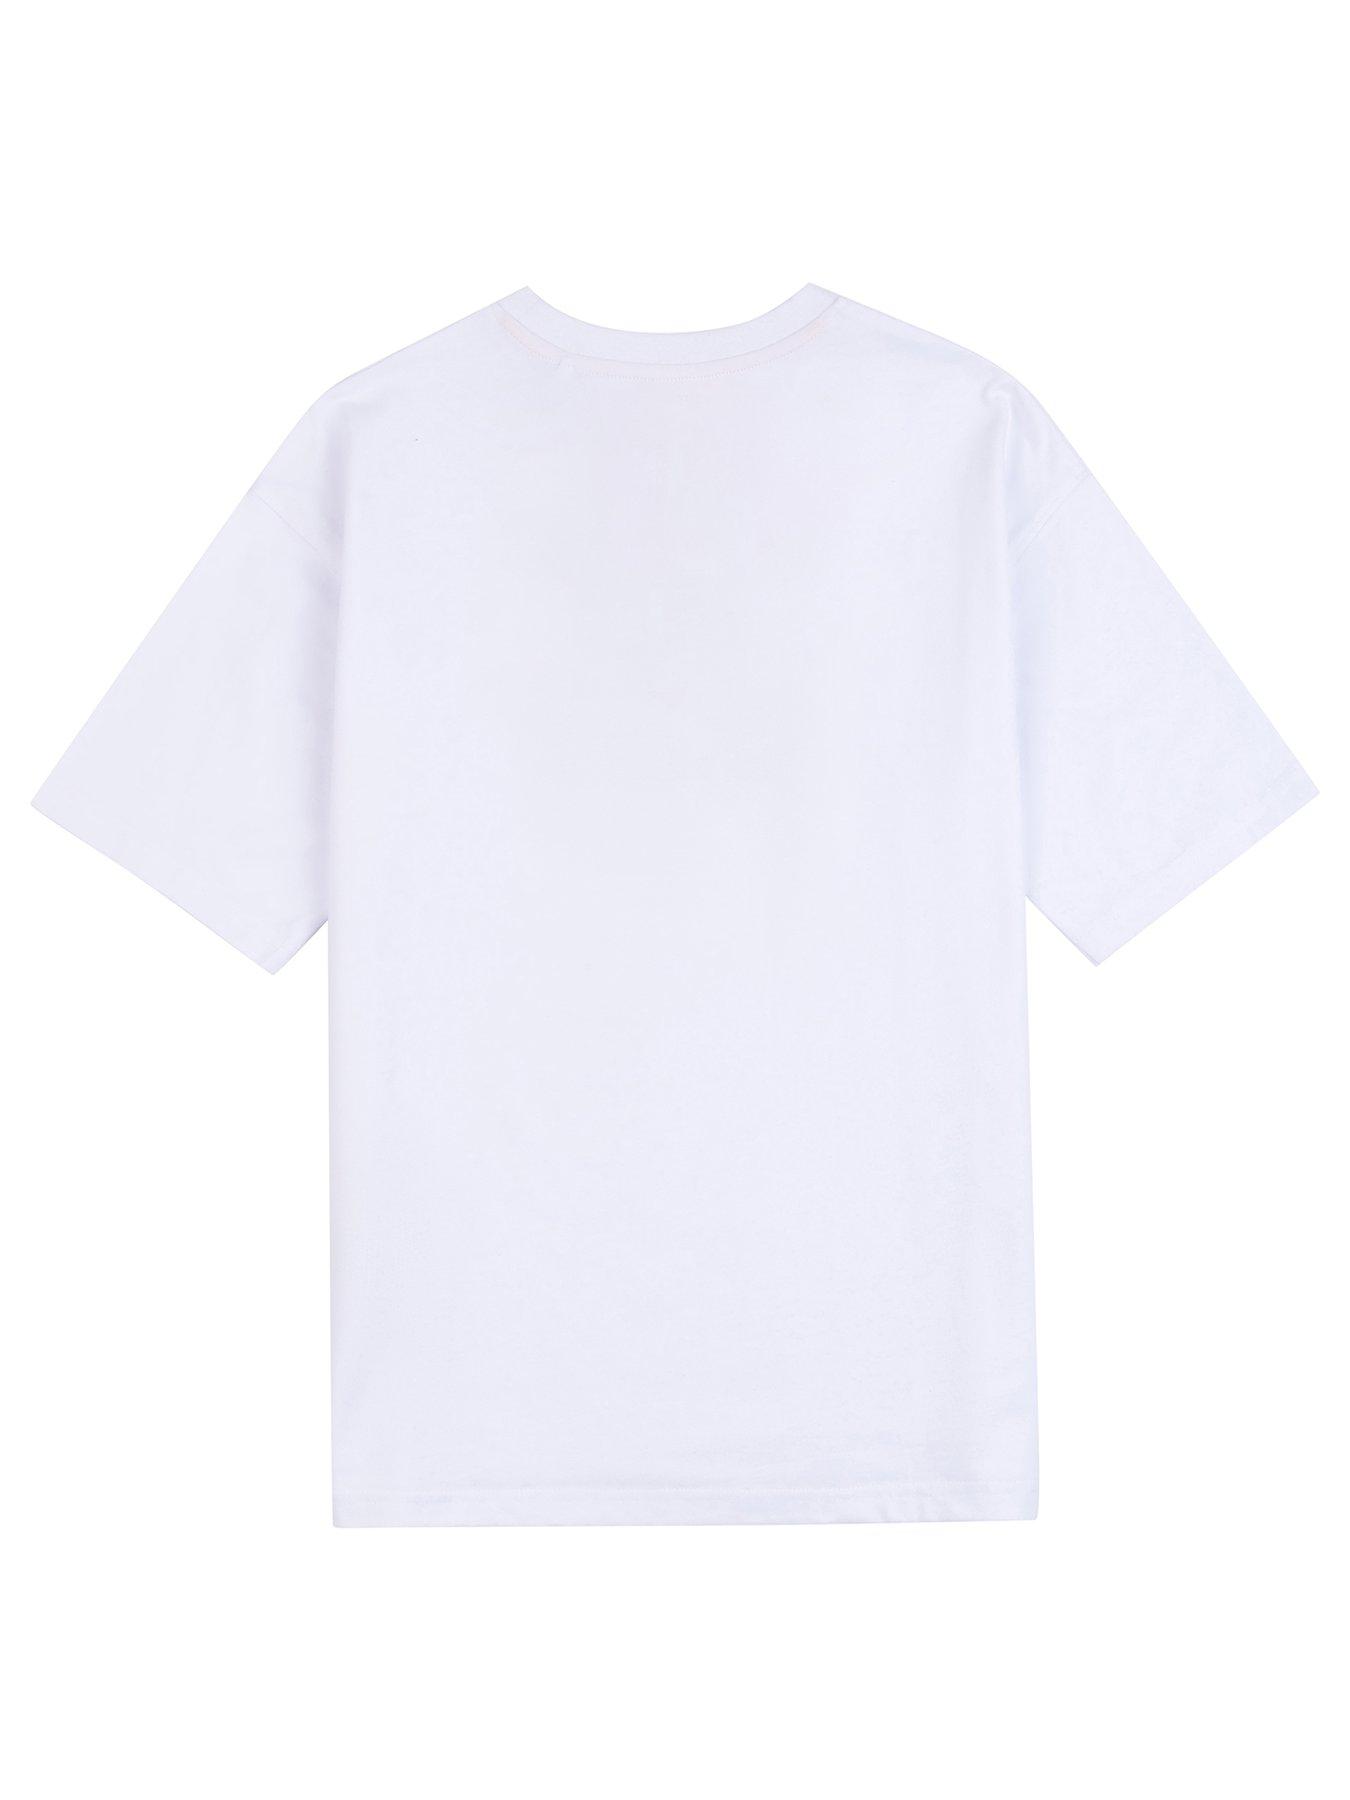 Juicy Couture Girls Towelling Logo Oversize Tee - White | very.co.uk